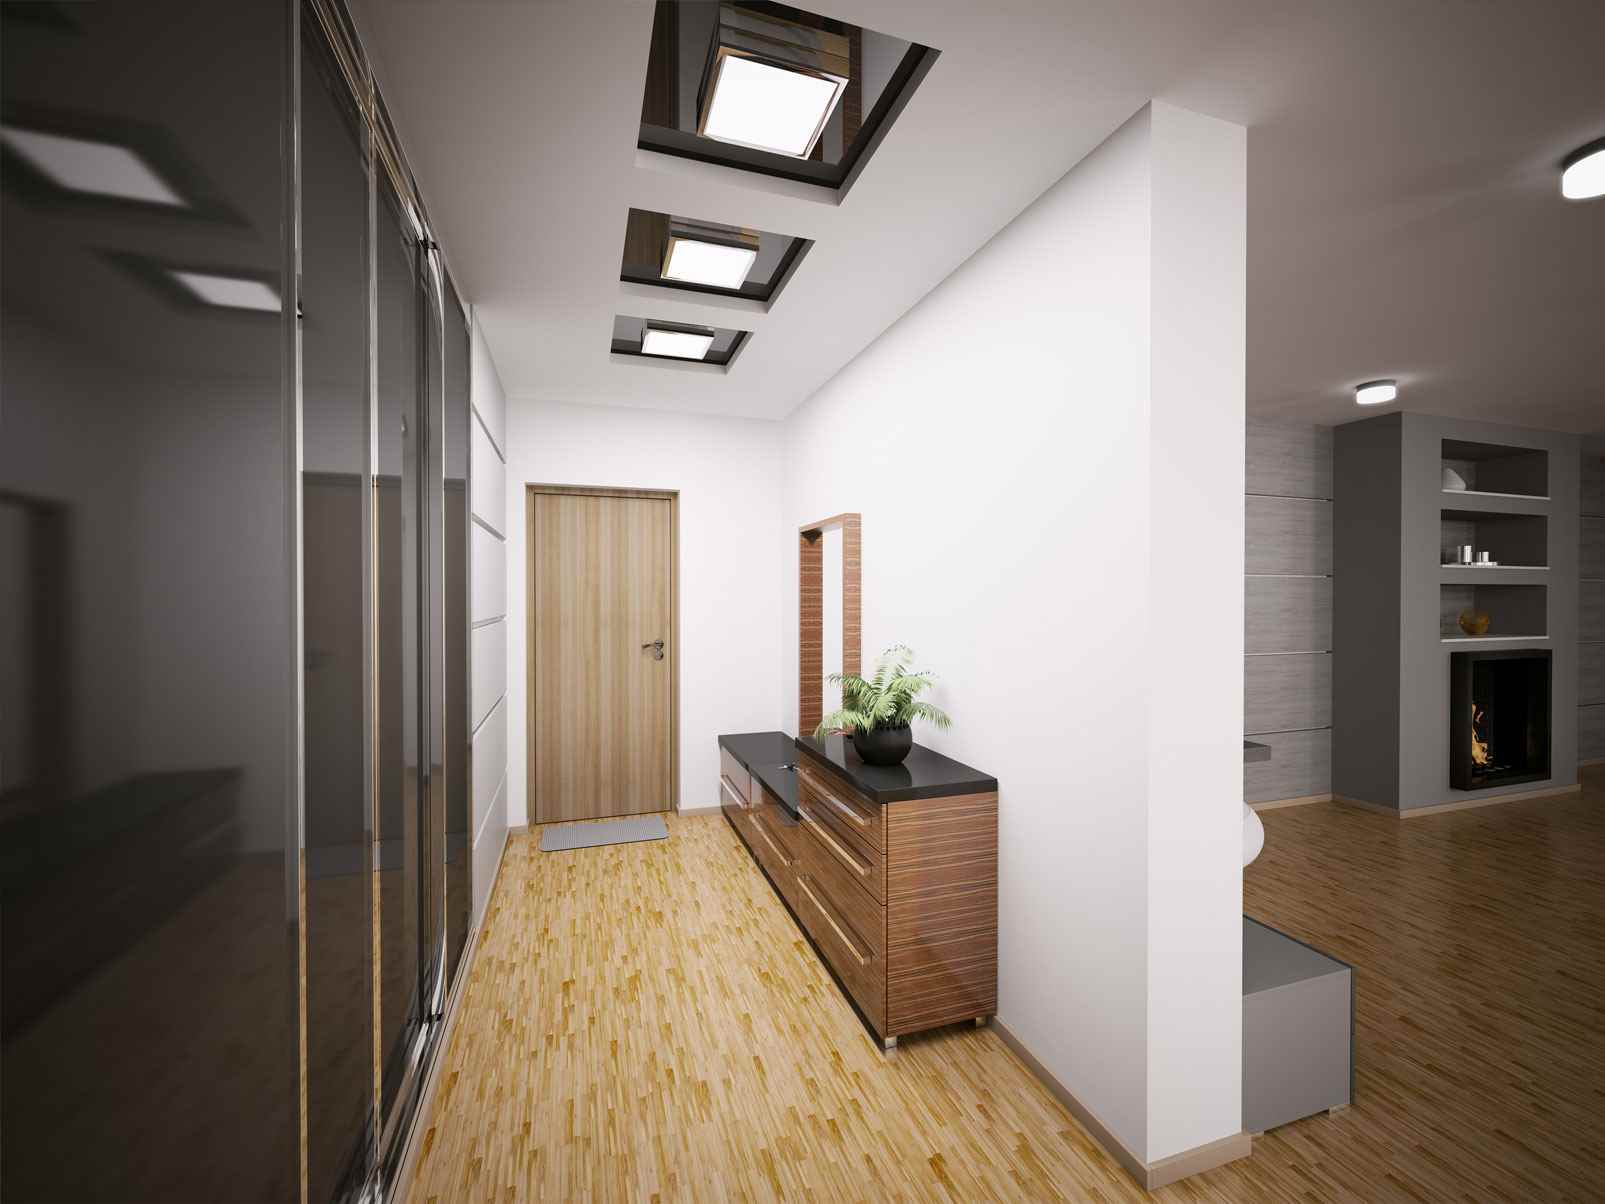 an example of a light style of a small hallway